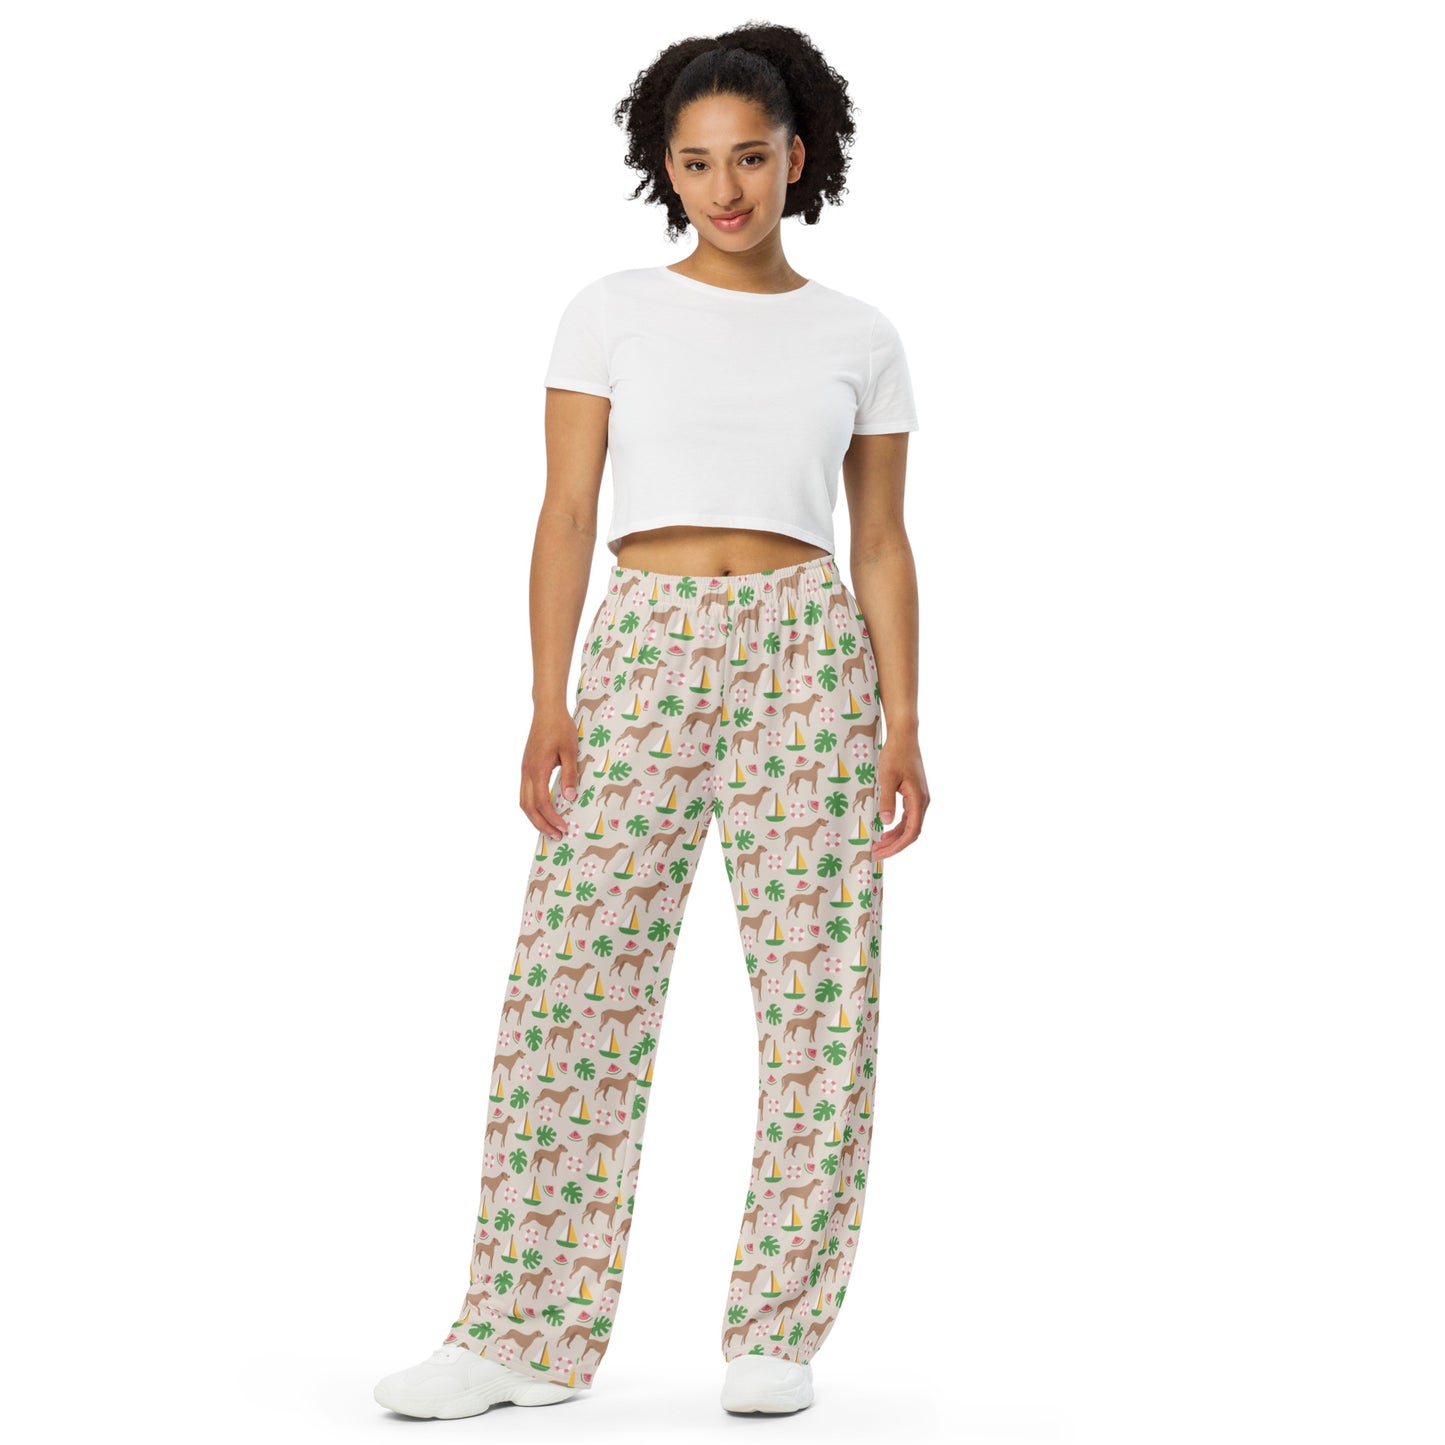 Tropical Paradise for Dog Lovers Super Soft Wide-leg Pajama/Sweats Bottoms